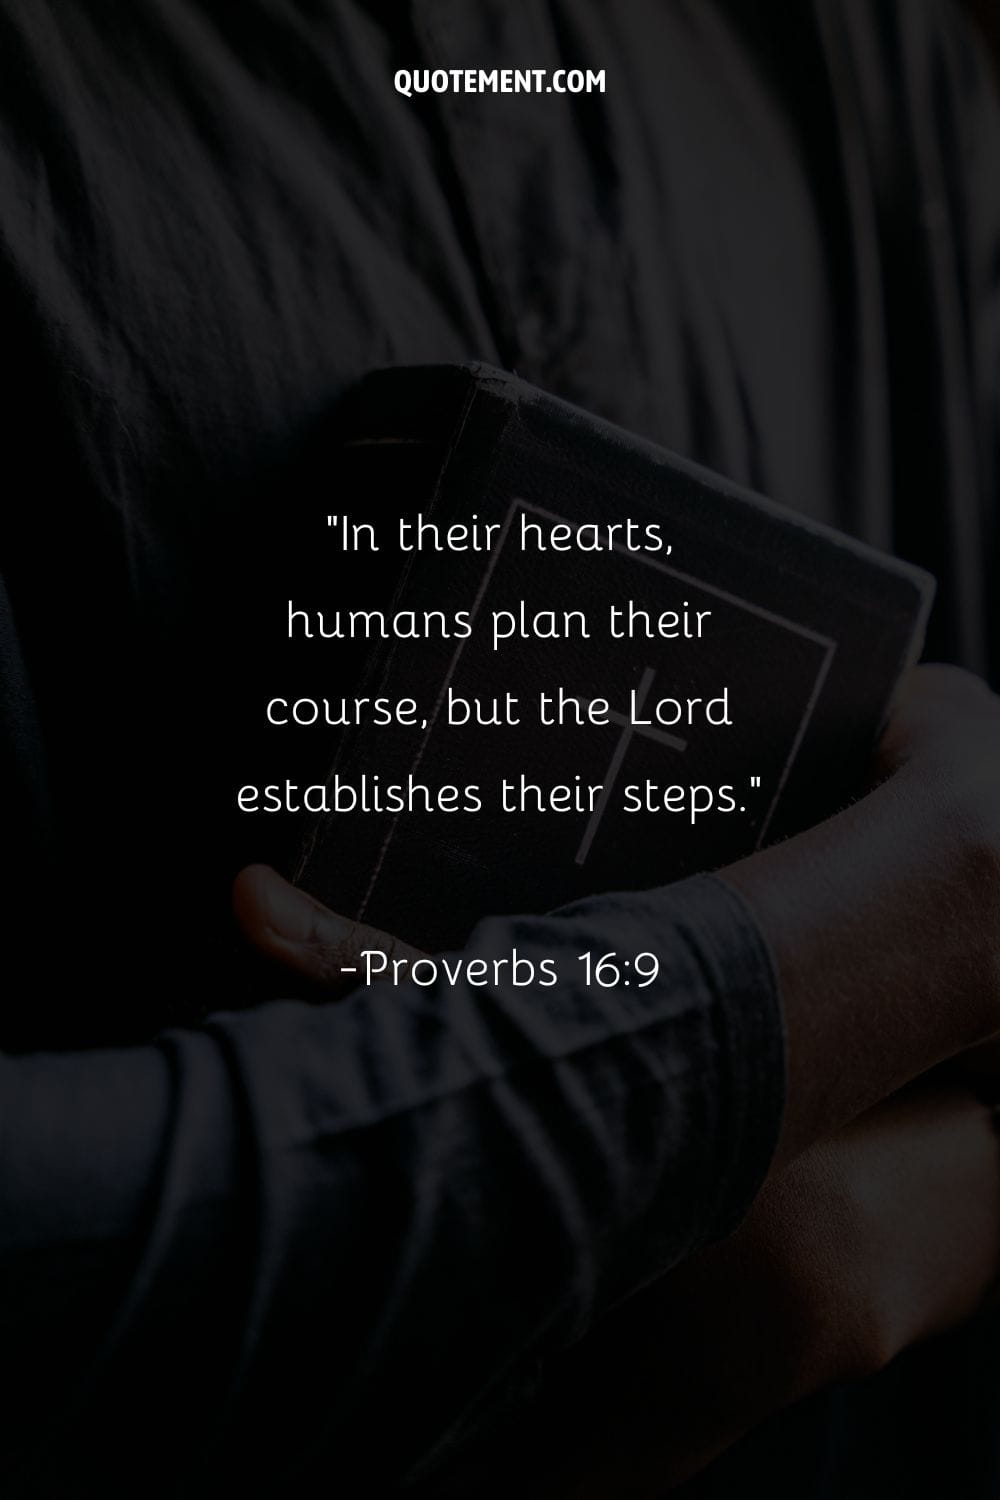 Image of a person cradling the Bible representing verse about God's plan.